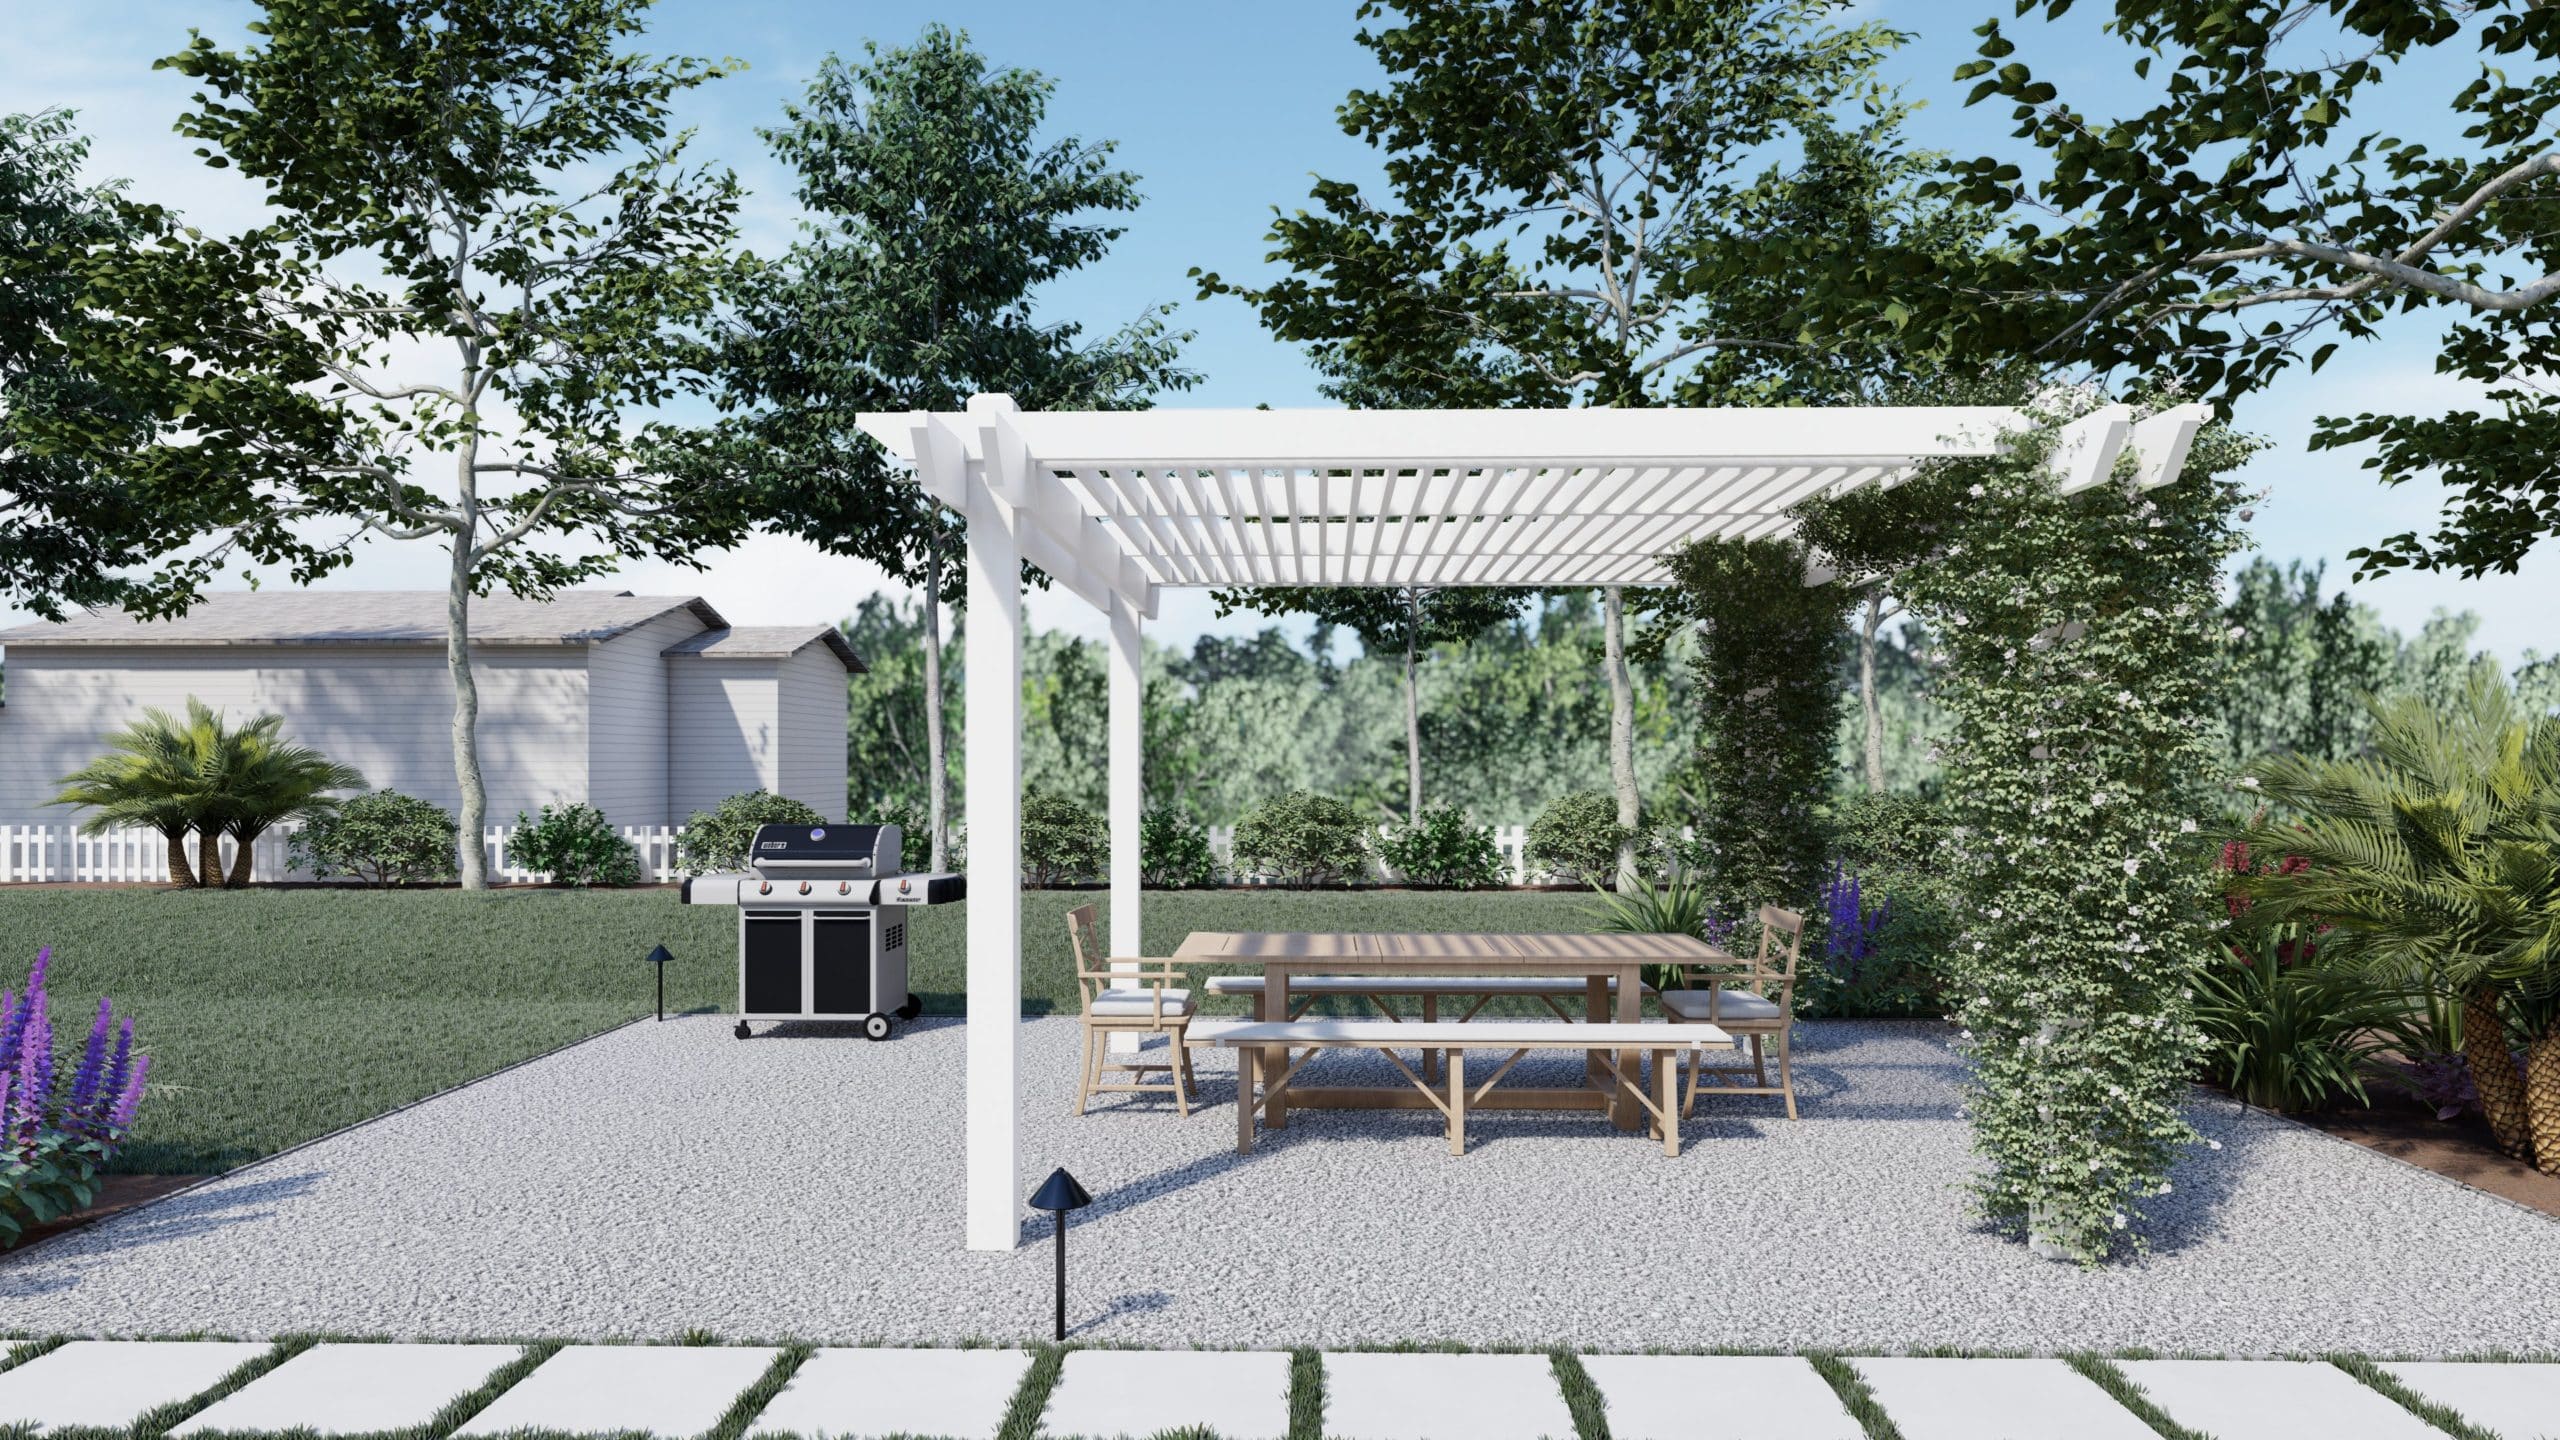 3D render of backyard design with gravel patio, dining set, and pergola